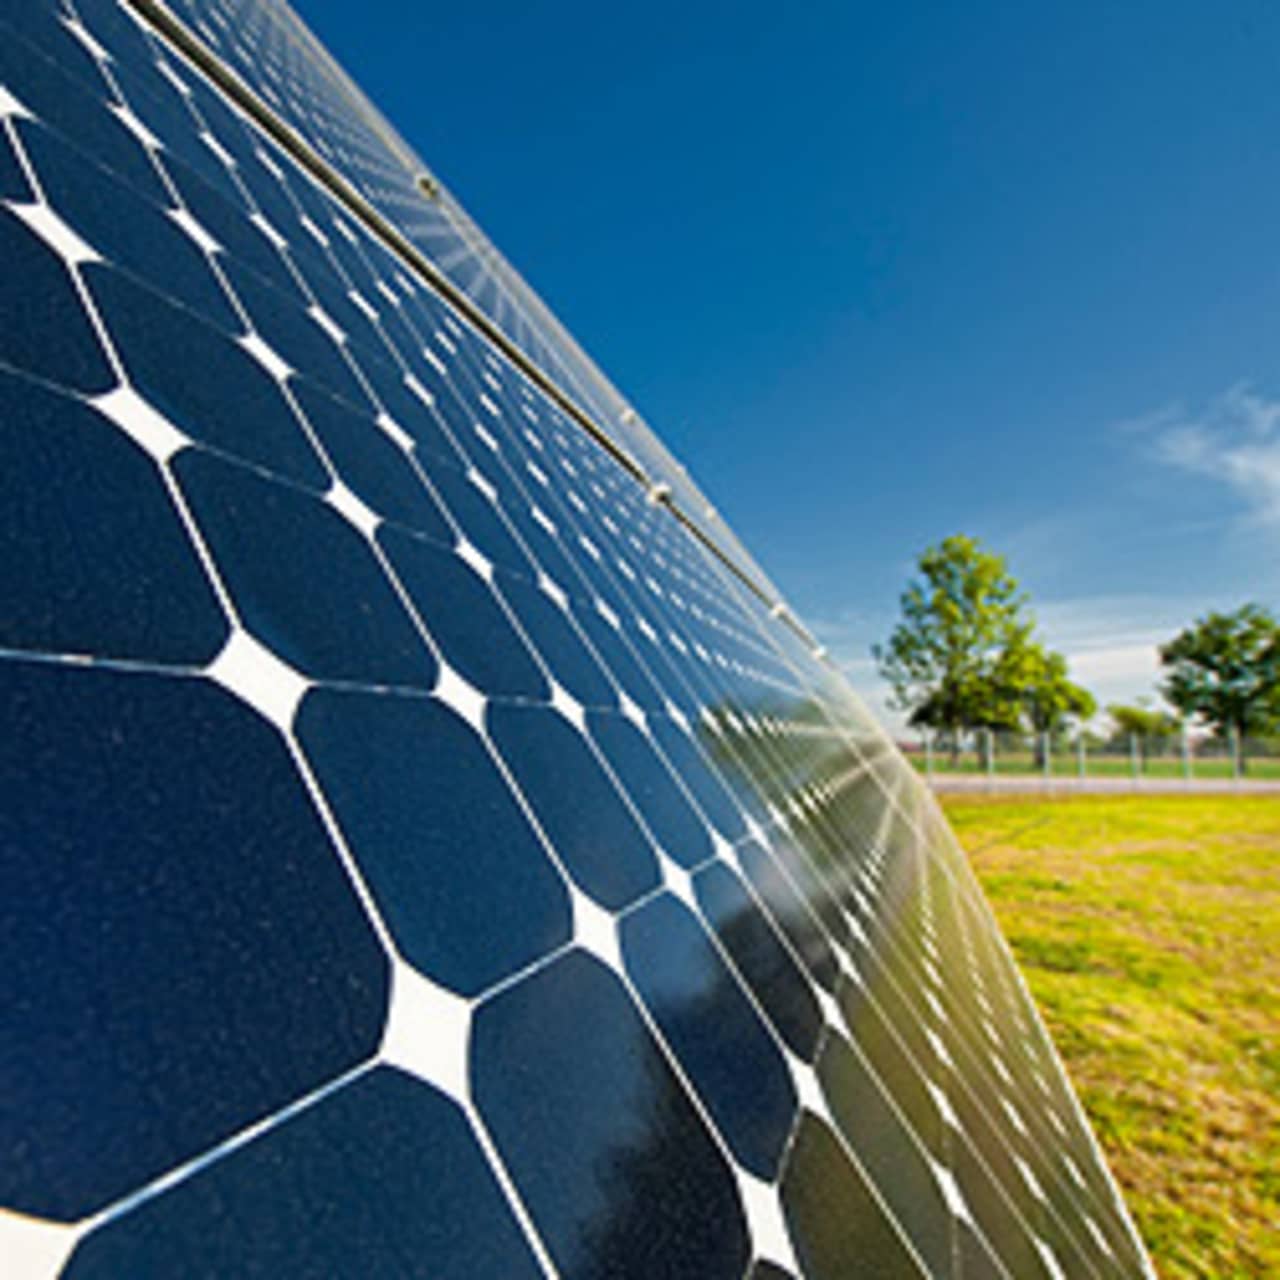 Learn more about solar power in a workshop at the New Canaan Library. 